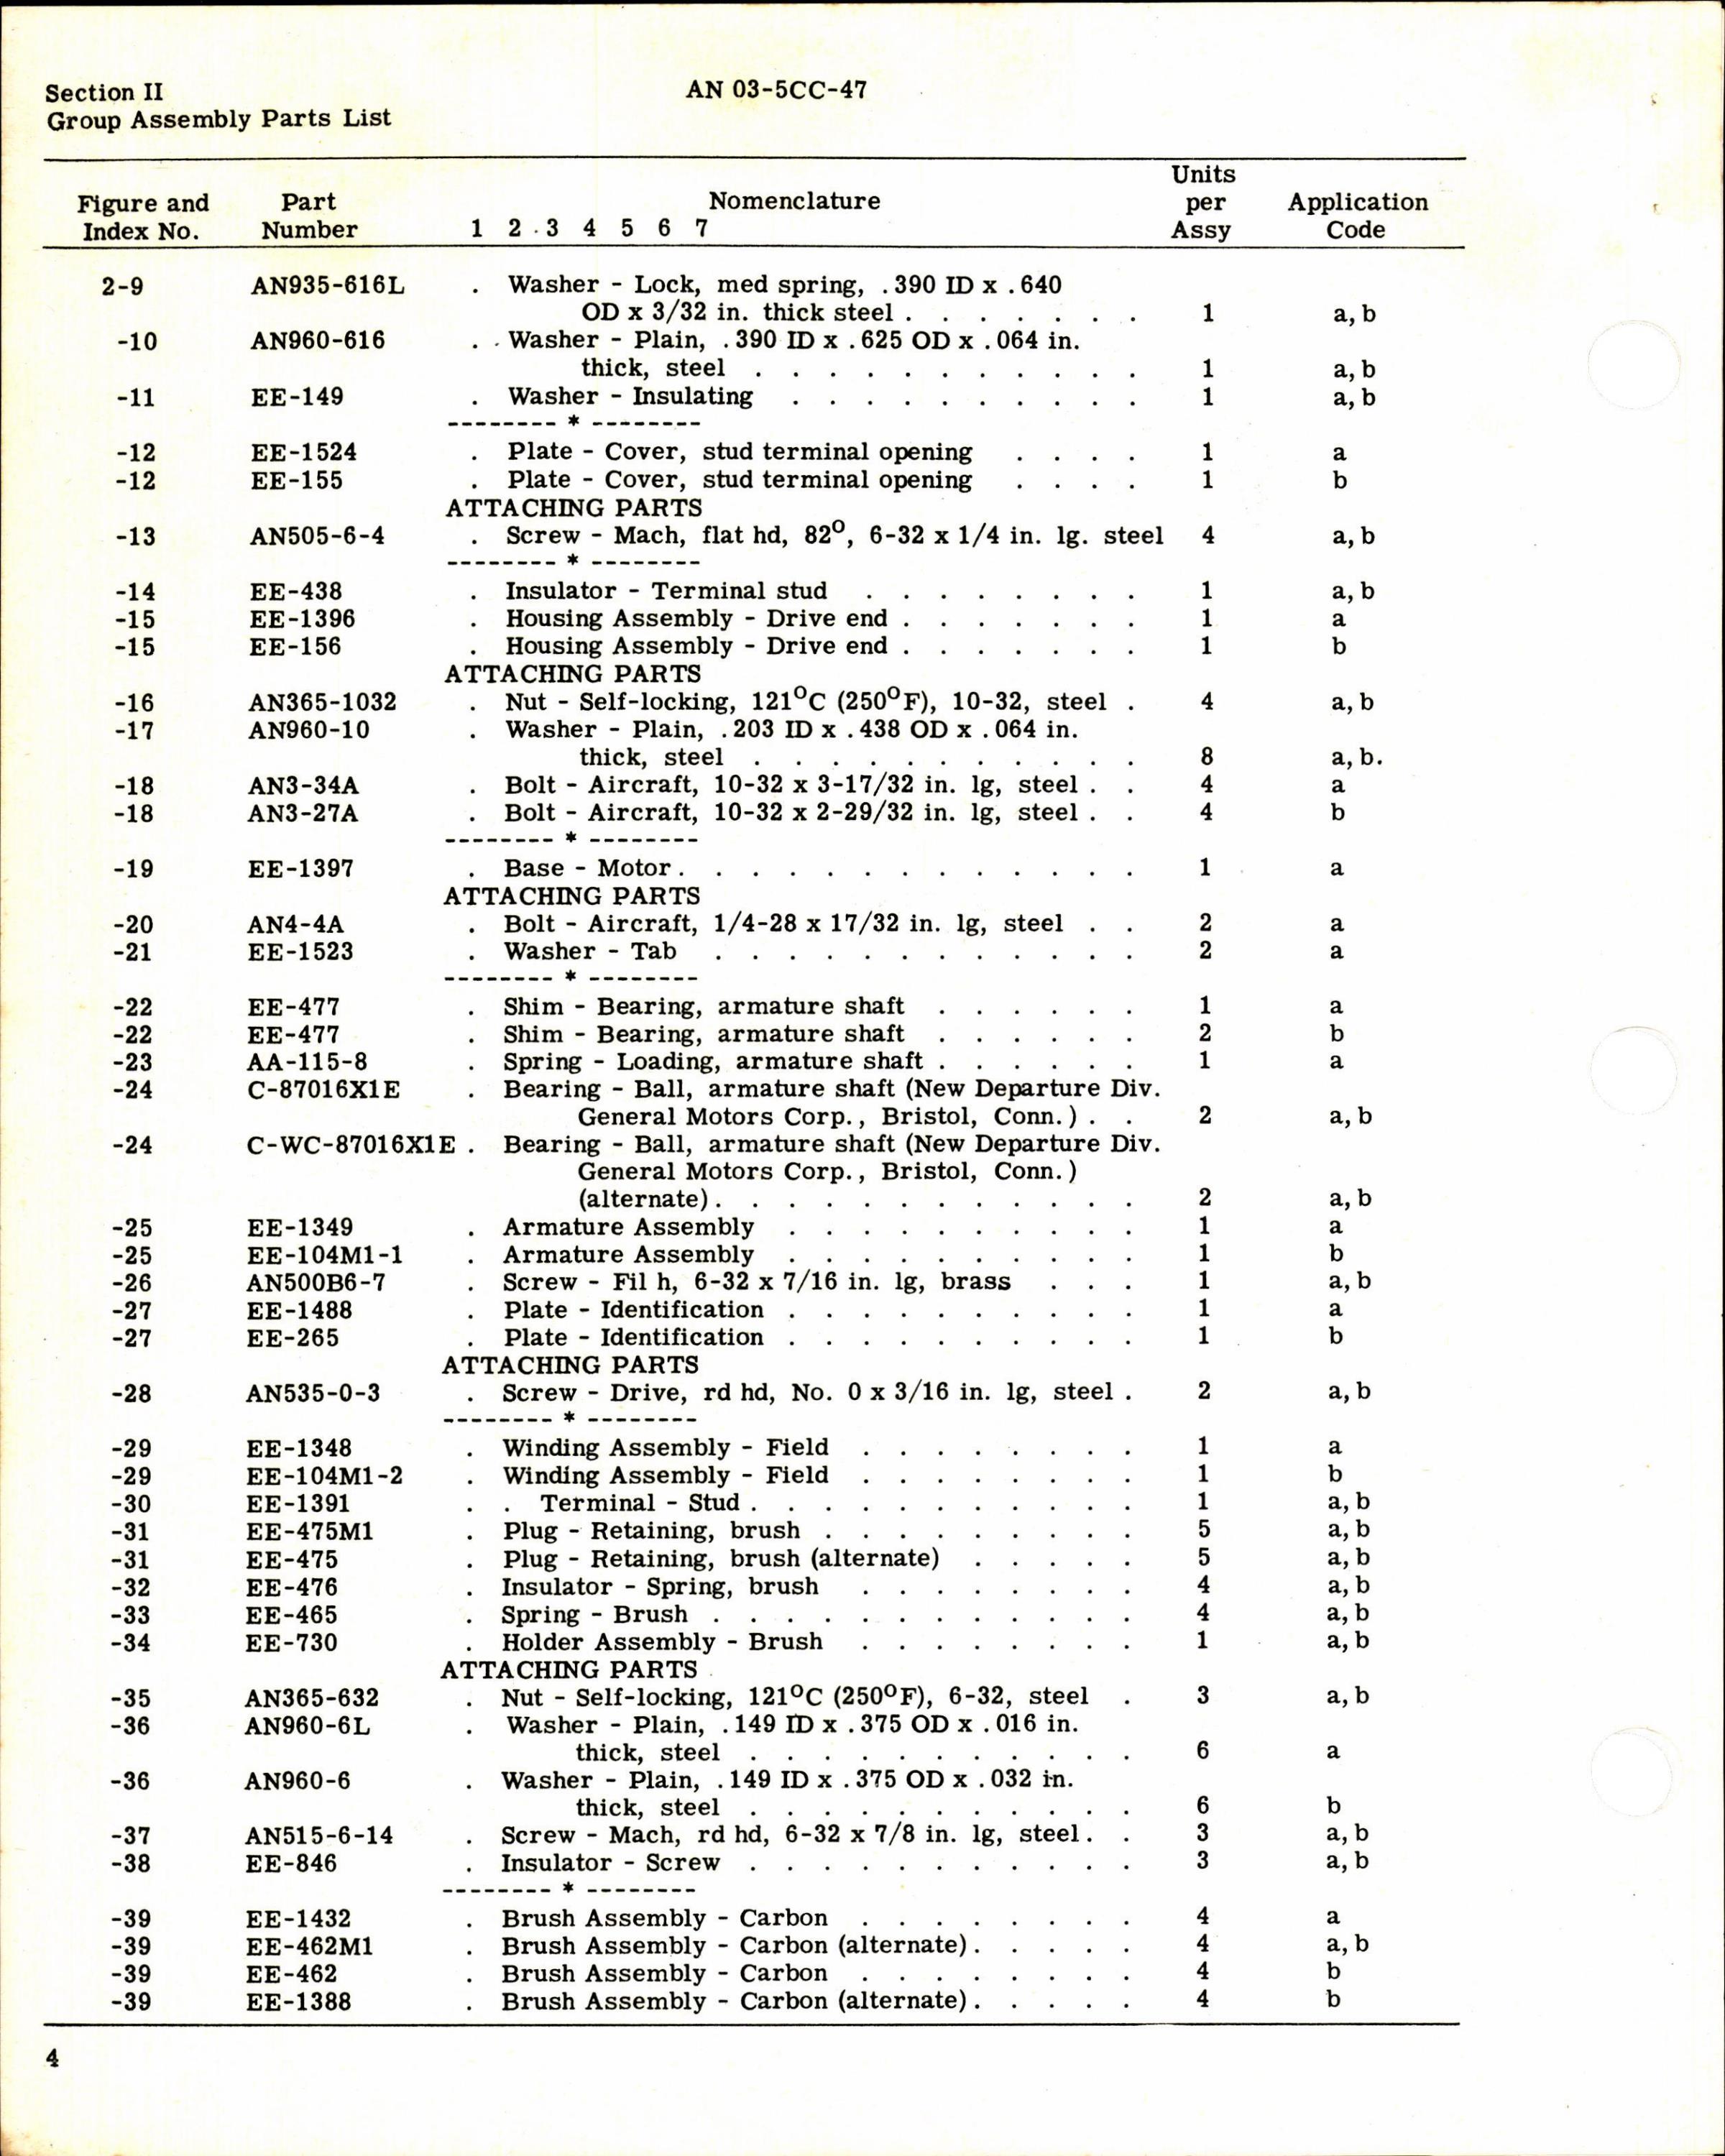 Sample page 4 from AirCorps Library document: Parts Catalog for Air Associates Electric Motors